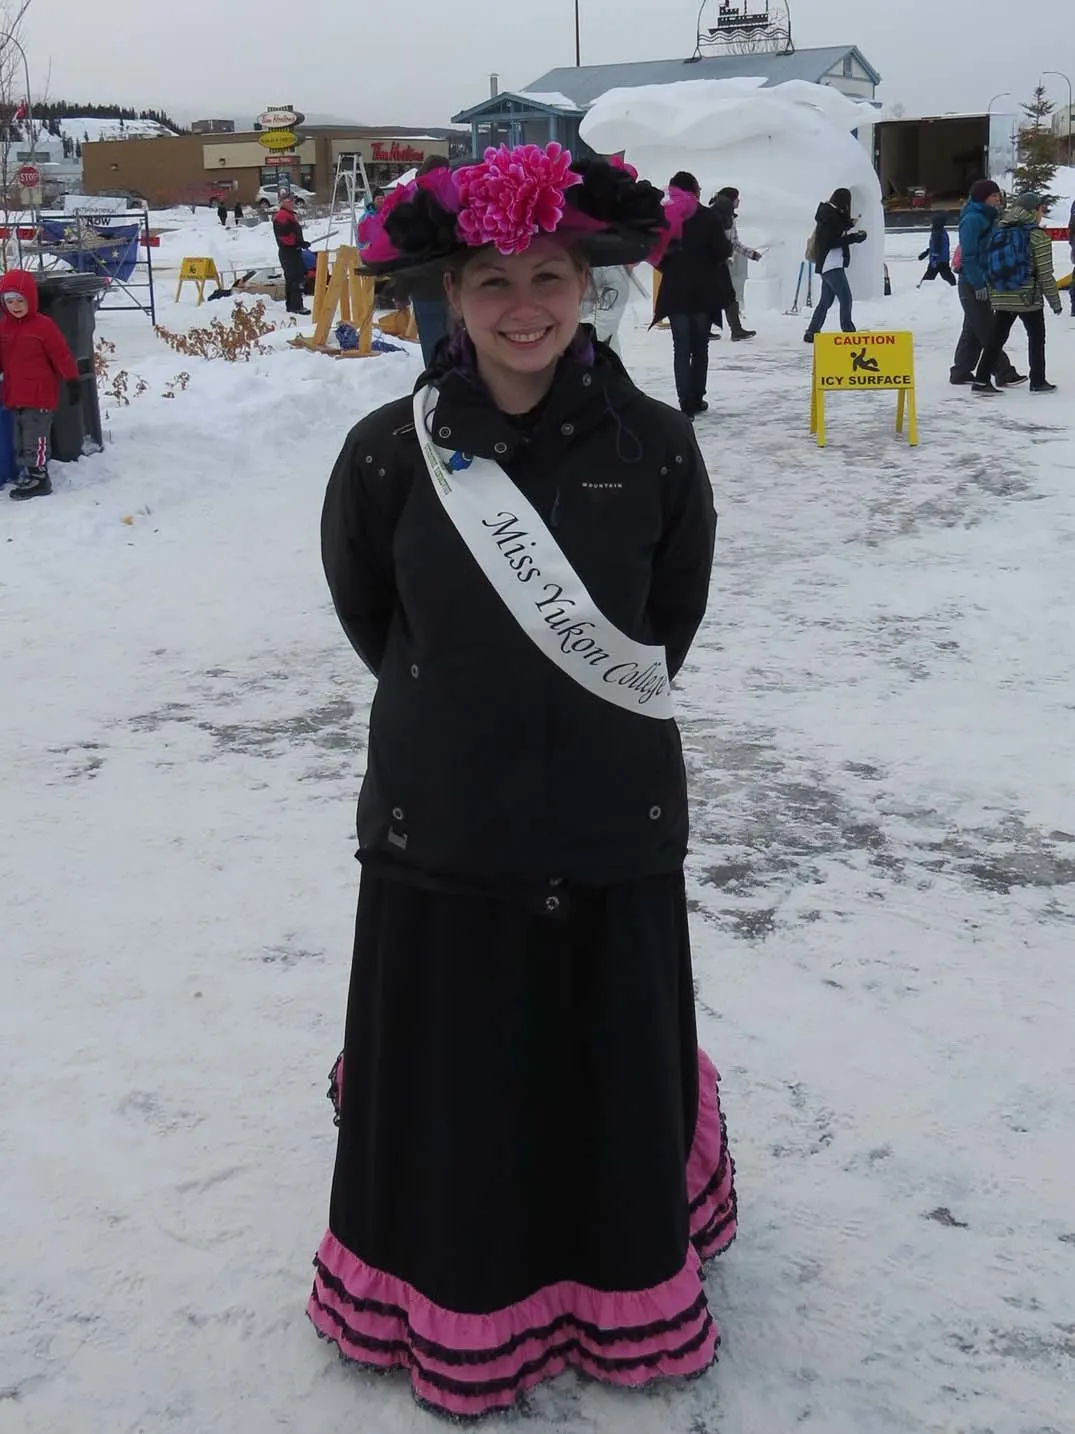 Queen candidate Rendezvous festival Whitehorse